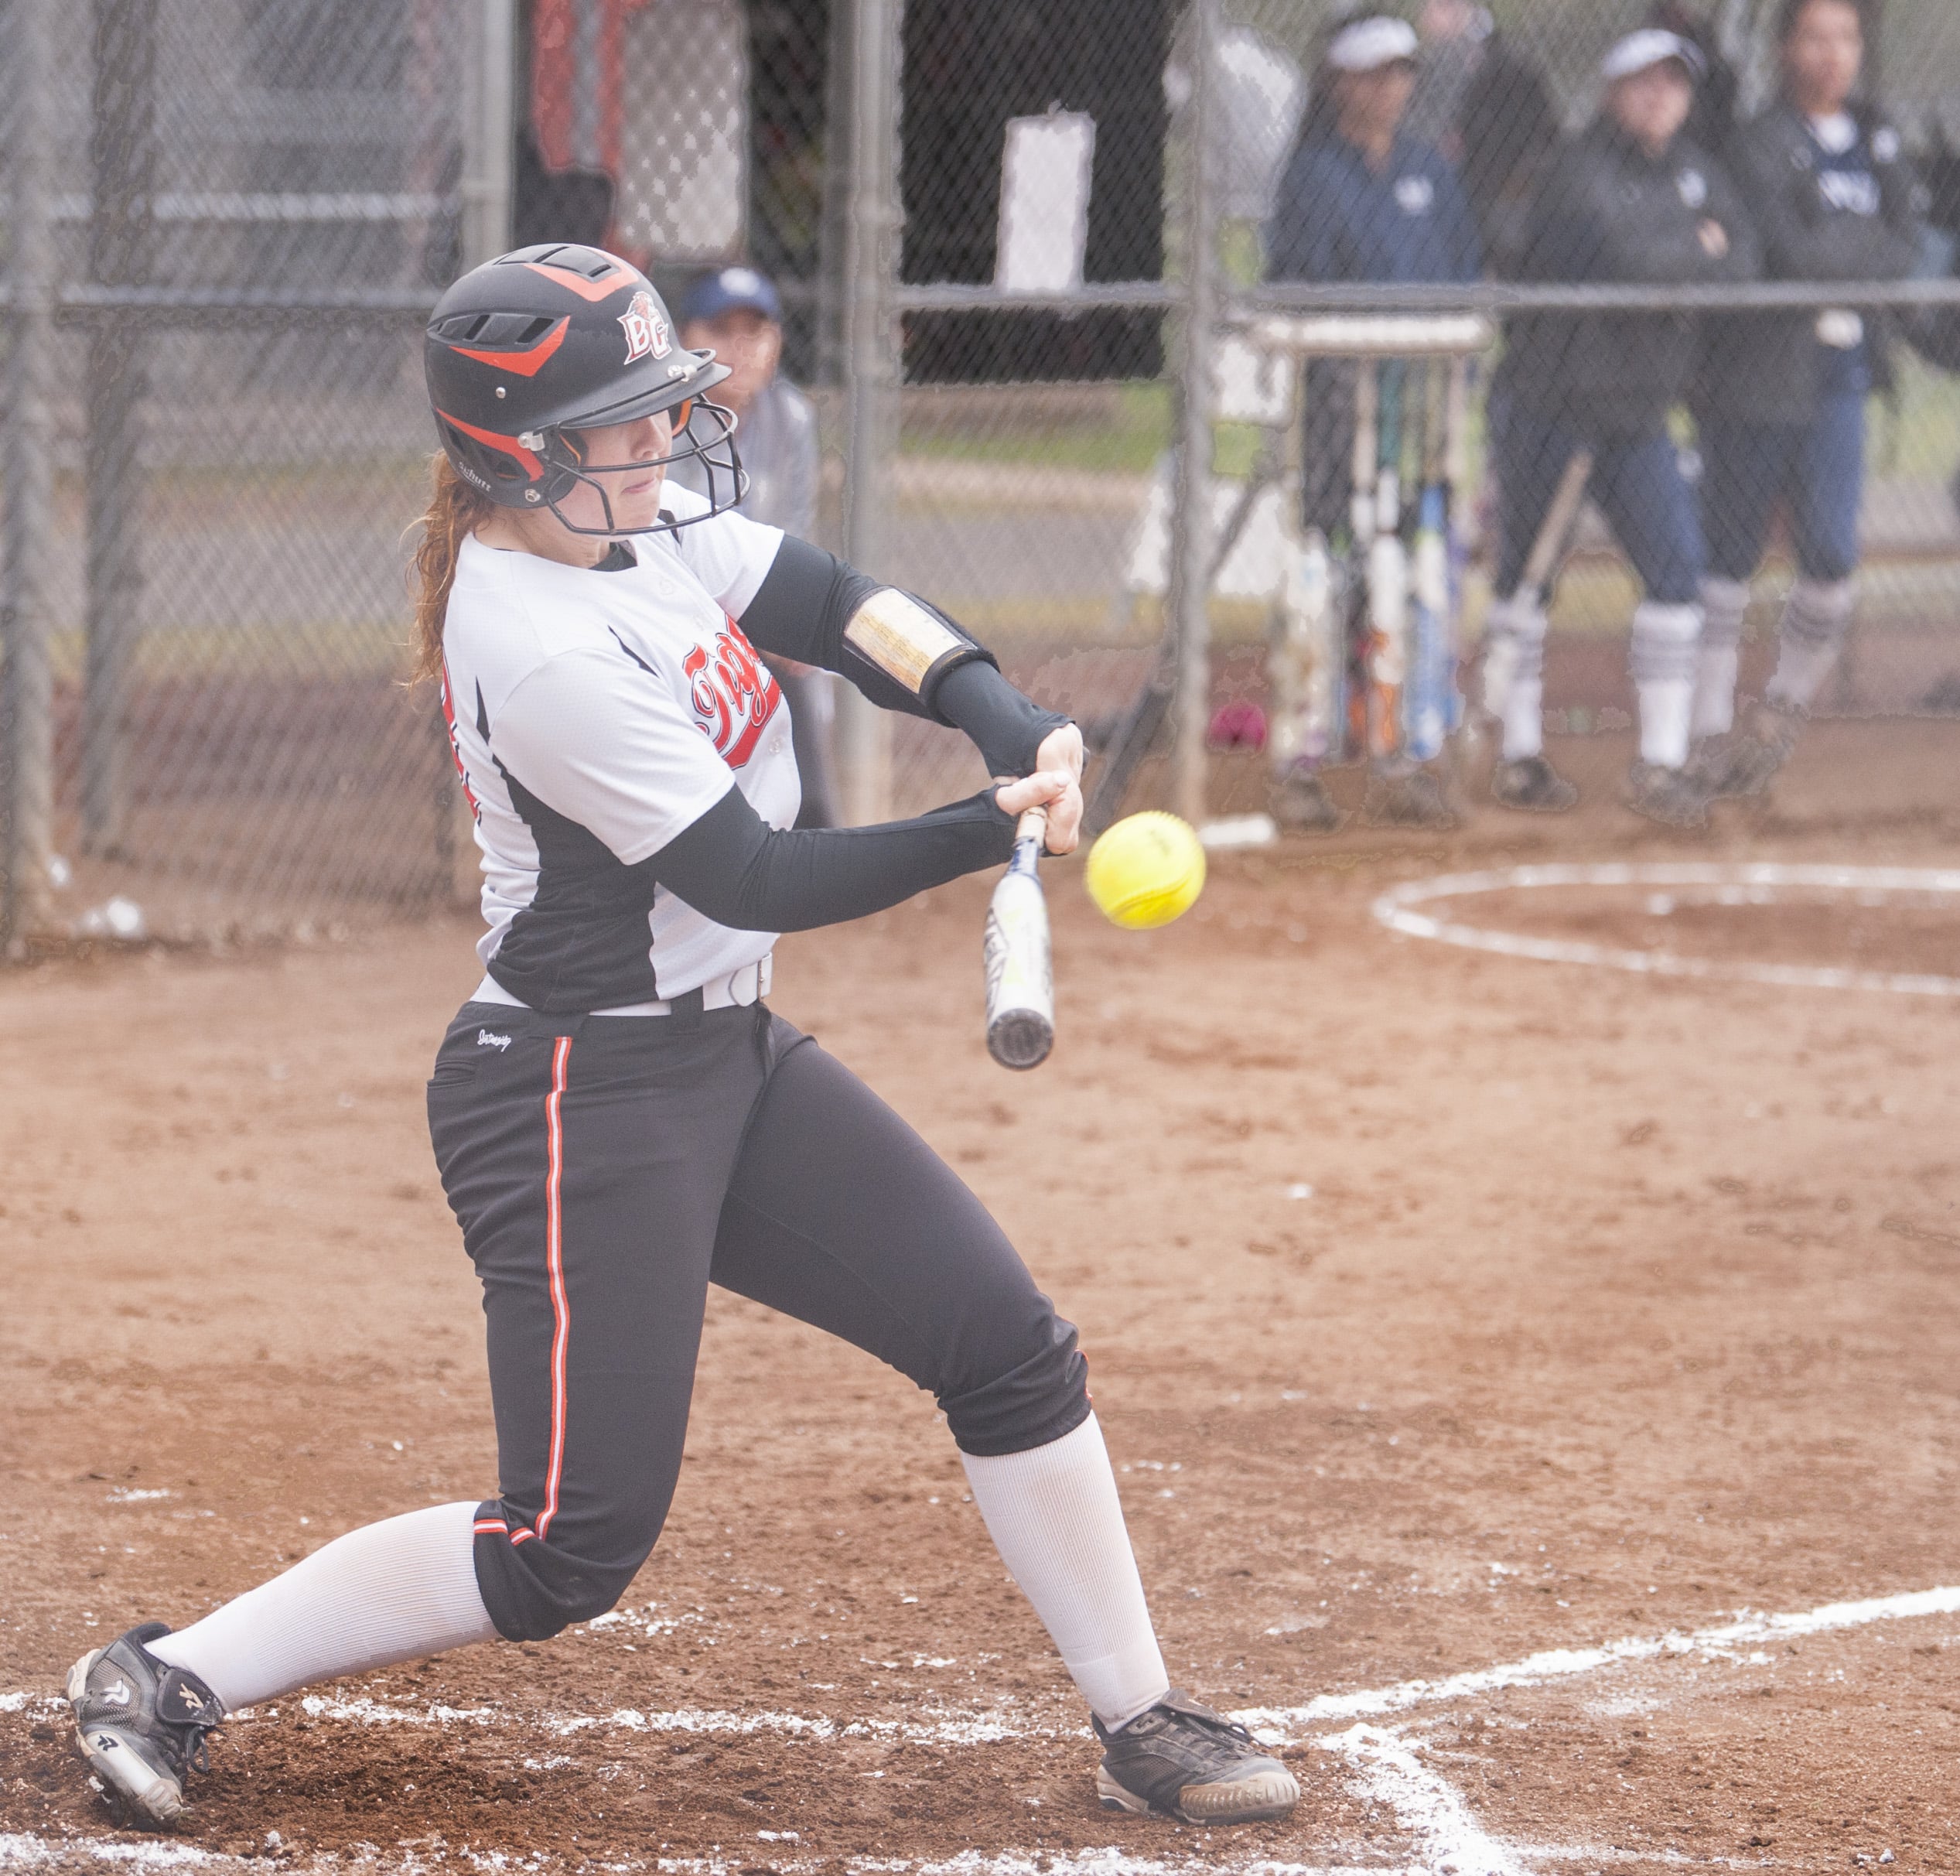 Battle Ground's Kassidy Davenport laces a single during Battle Ground' 7-3 4A GSHL victory on Tuesday at VGSA.